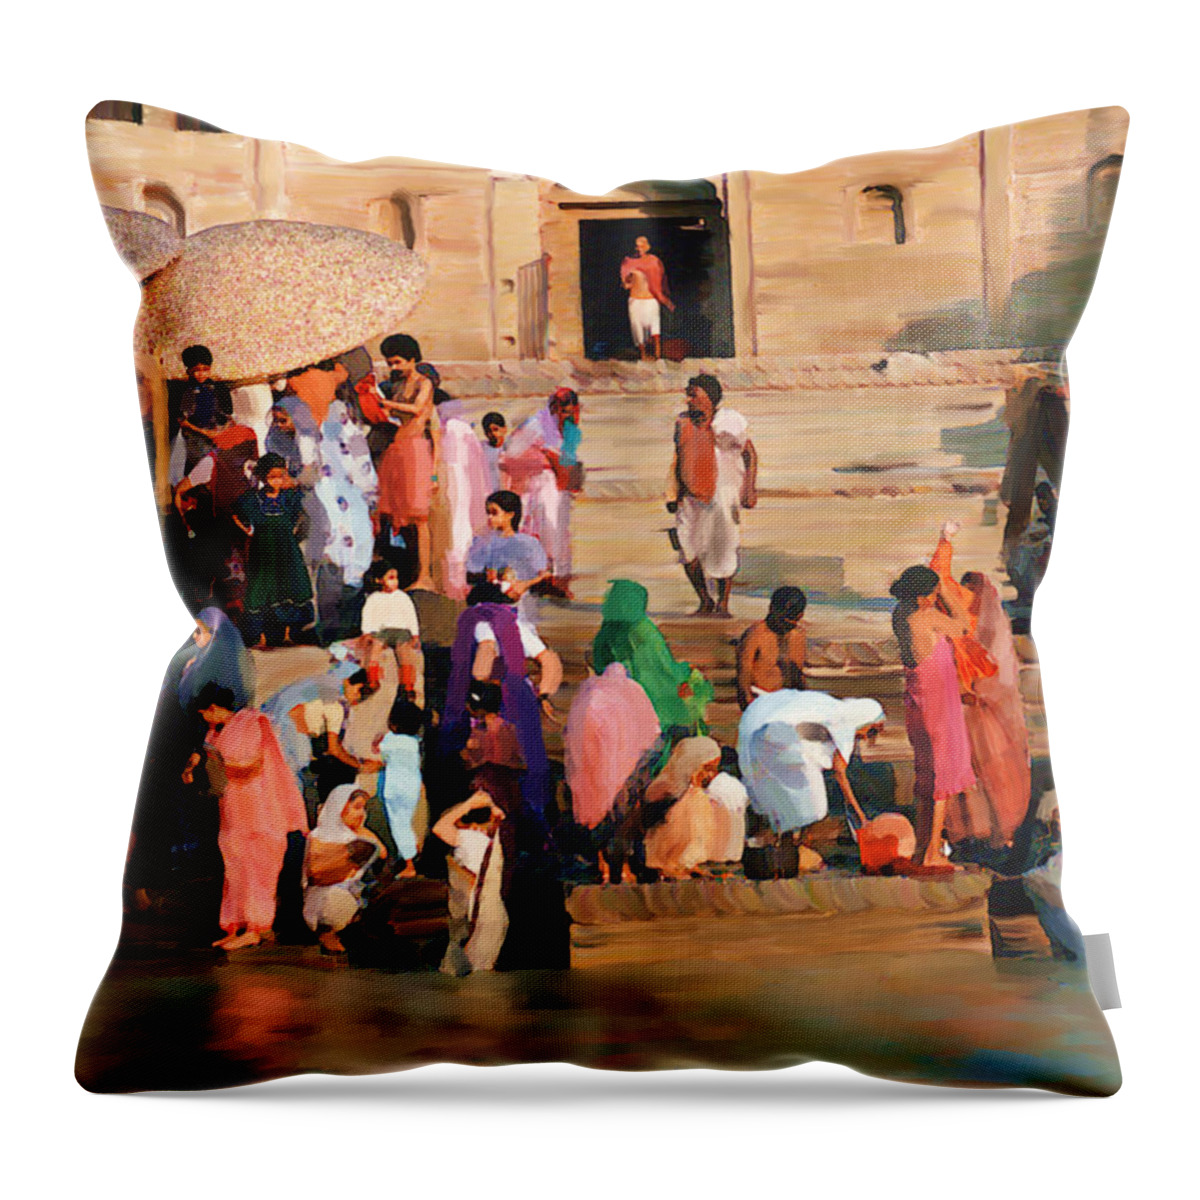 Ganges River Throw Pillow featuring the photograph Ganges by Kurt Van Wagner